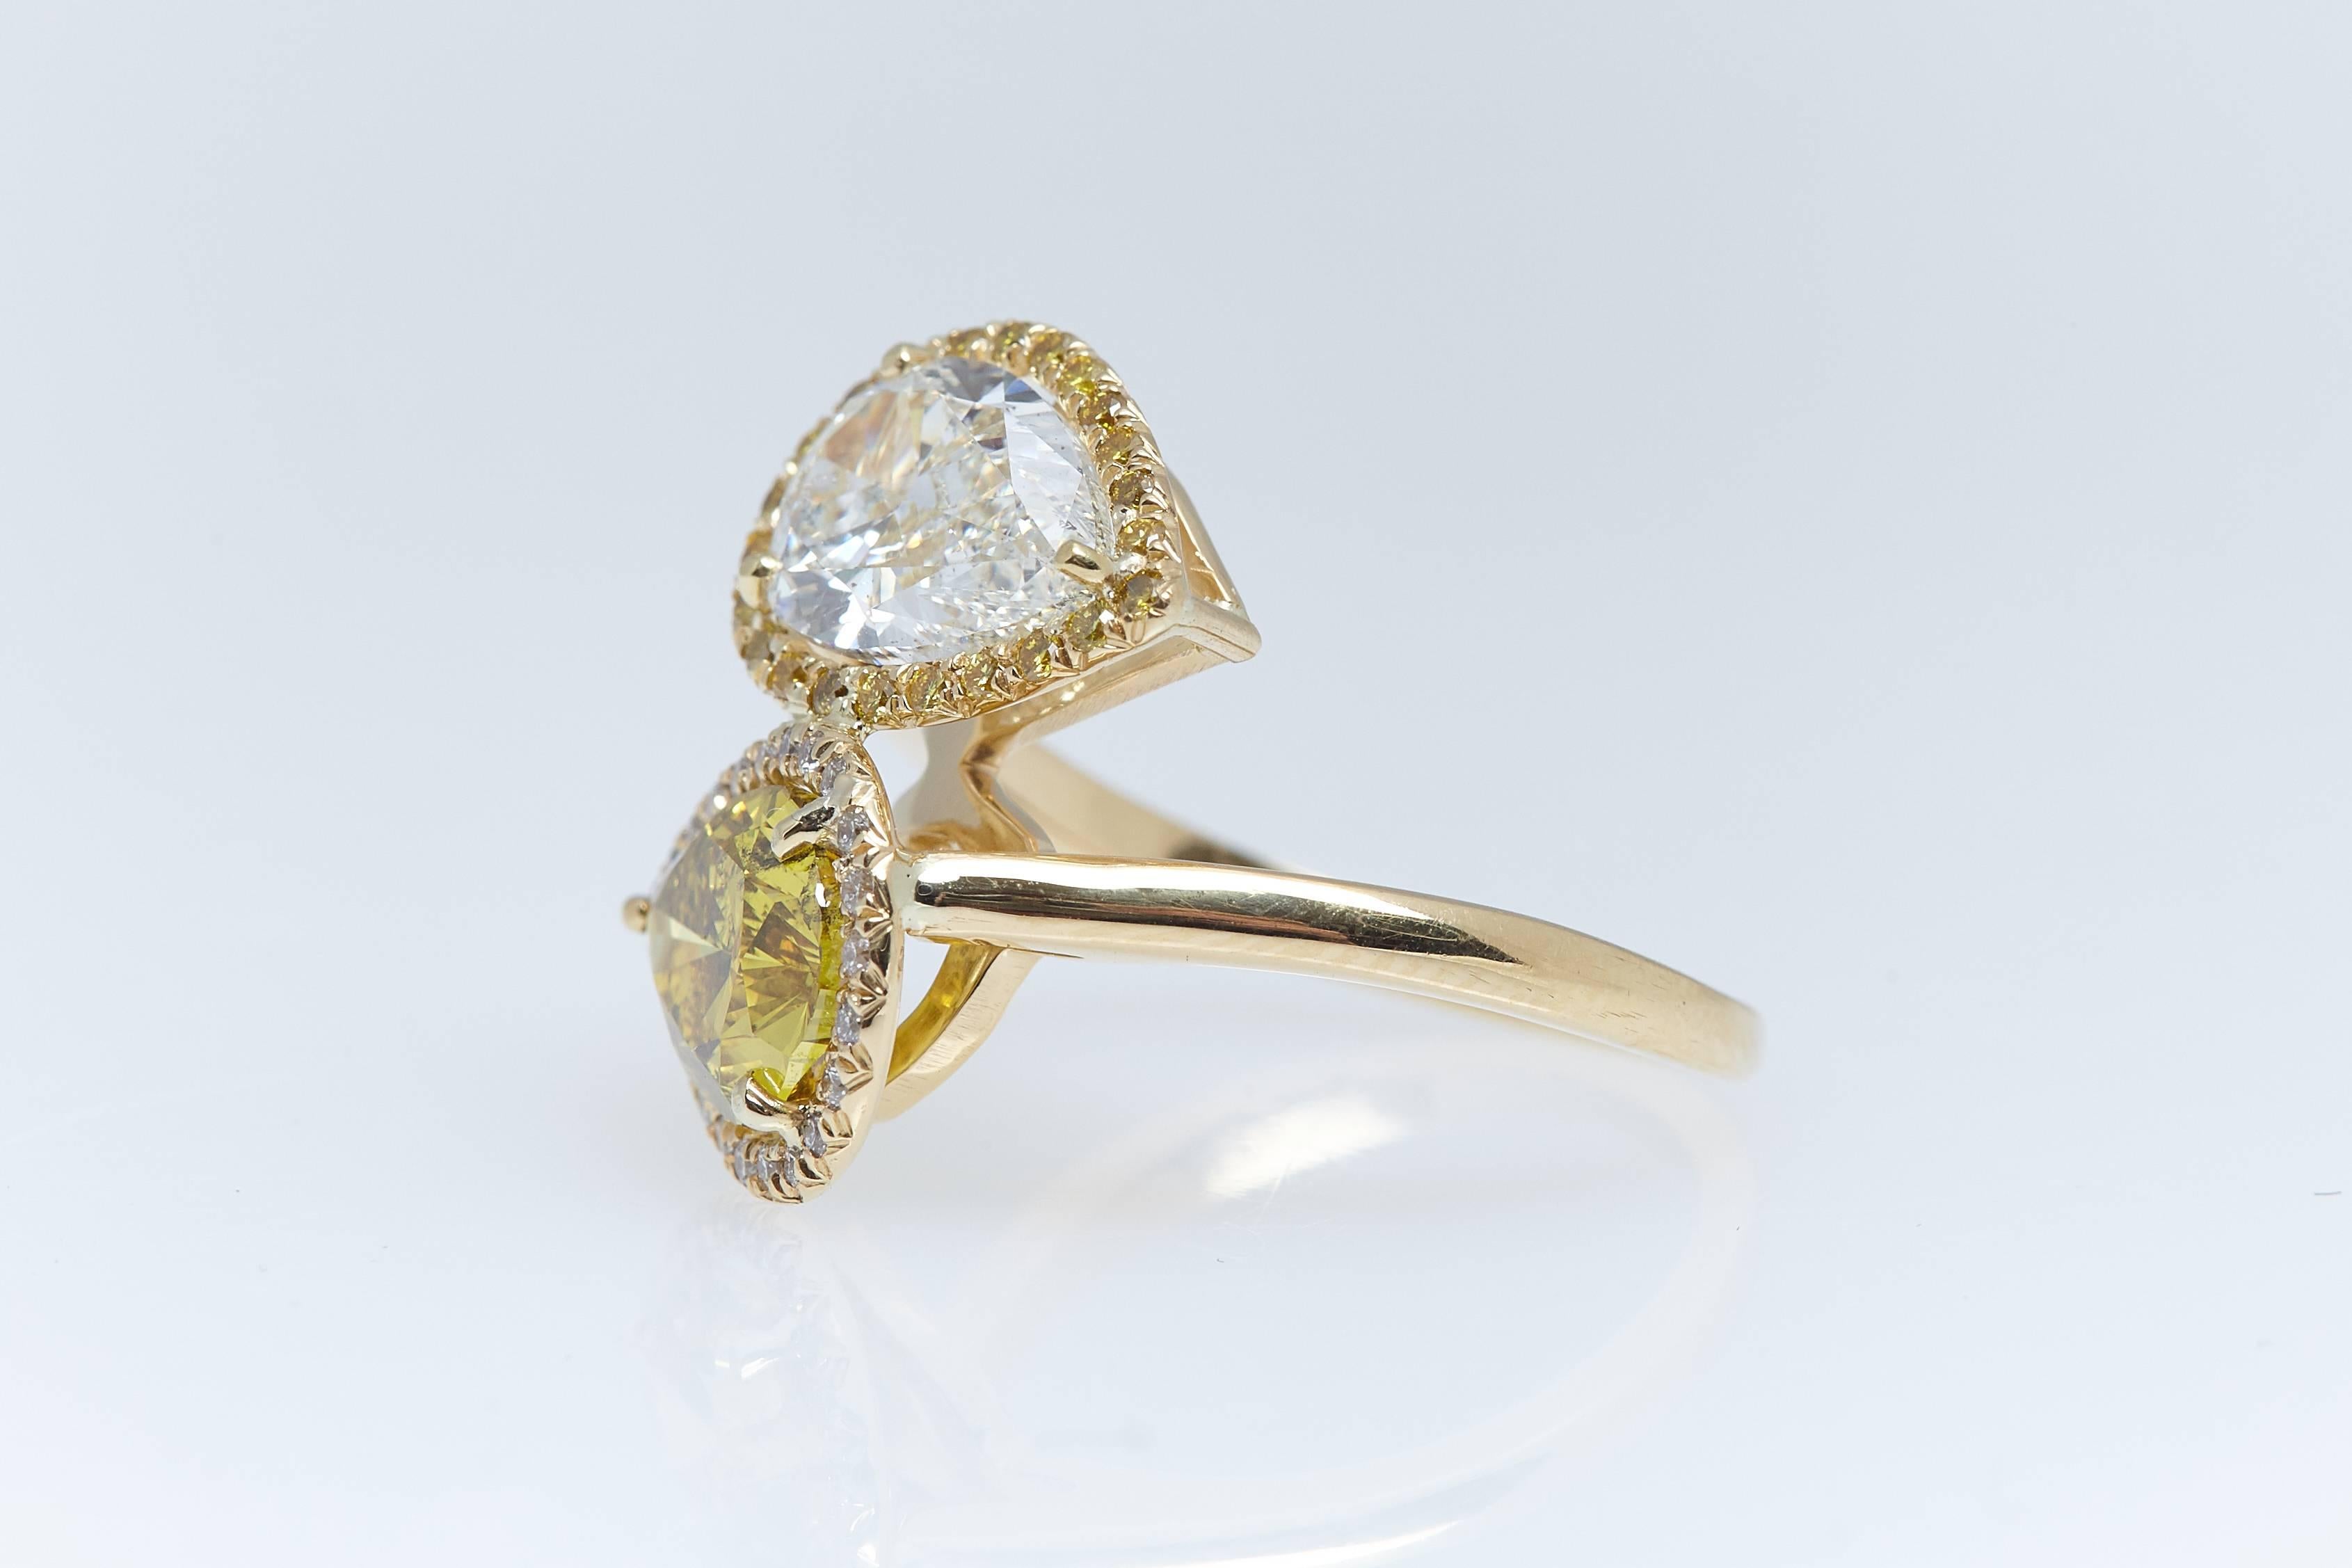 Two Pear shaped diamonds with a total weight of 4.03 carats in 18 karat yellow gold crossover designed ring. Both pear shaped diamonds have certificates from the Gemological Institute of America. One pear shape weighs 2.02 carats and is 